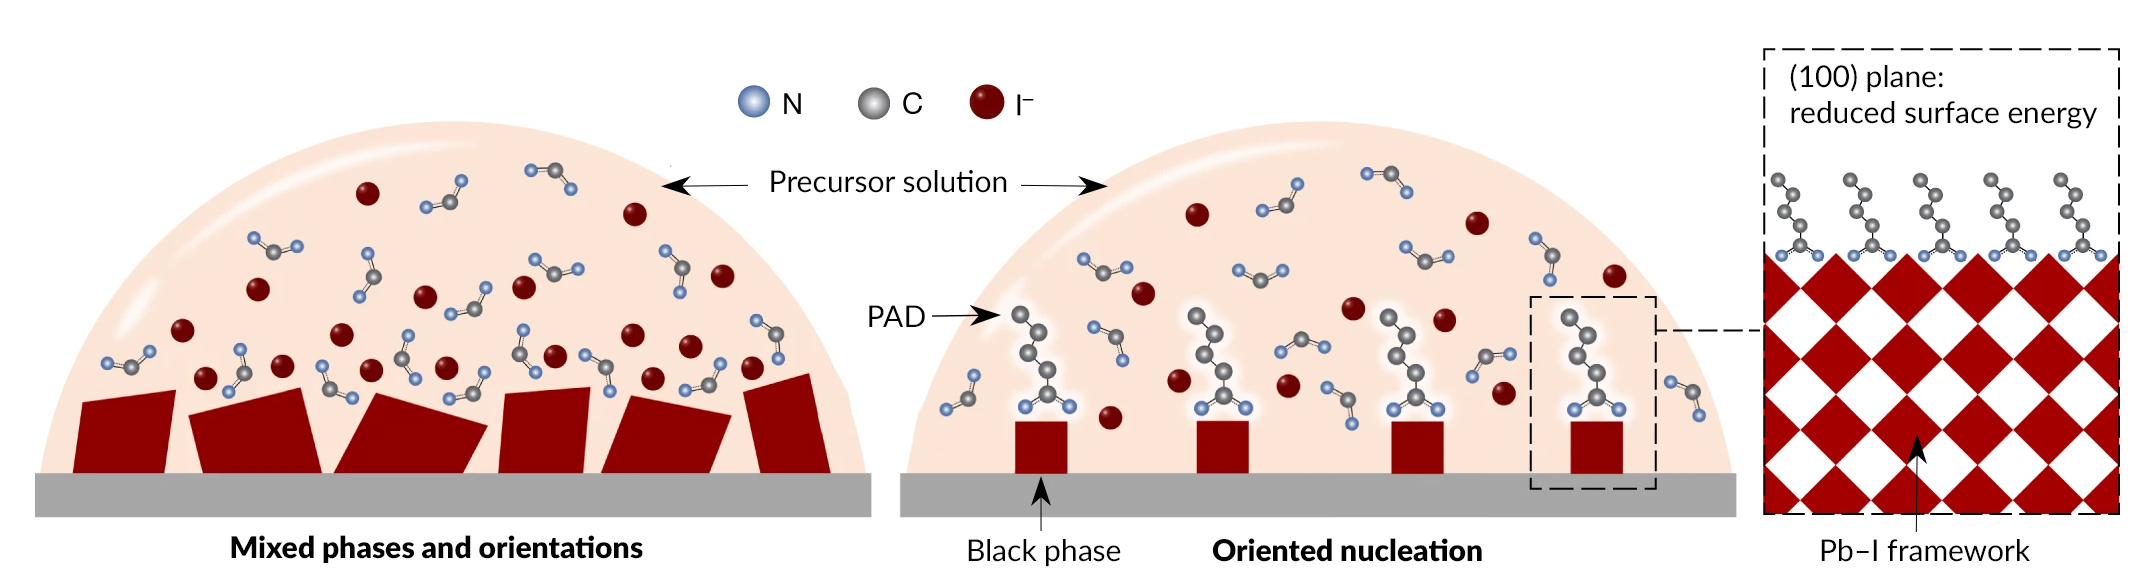 Schematic of two hemispherical “droplets” of precursor solution on a substrate, one with and one without PAD. Without PAD, crystals (reddish shapes in the droplet, growing from the substrate) are irregularly shaped. With PAD, black-phase crystals are shown as smaller, well-formed, and equally spaced.